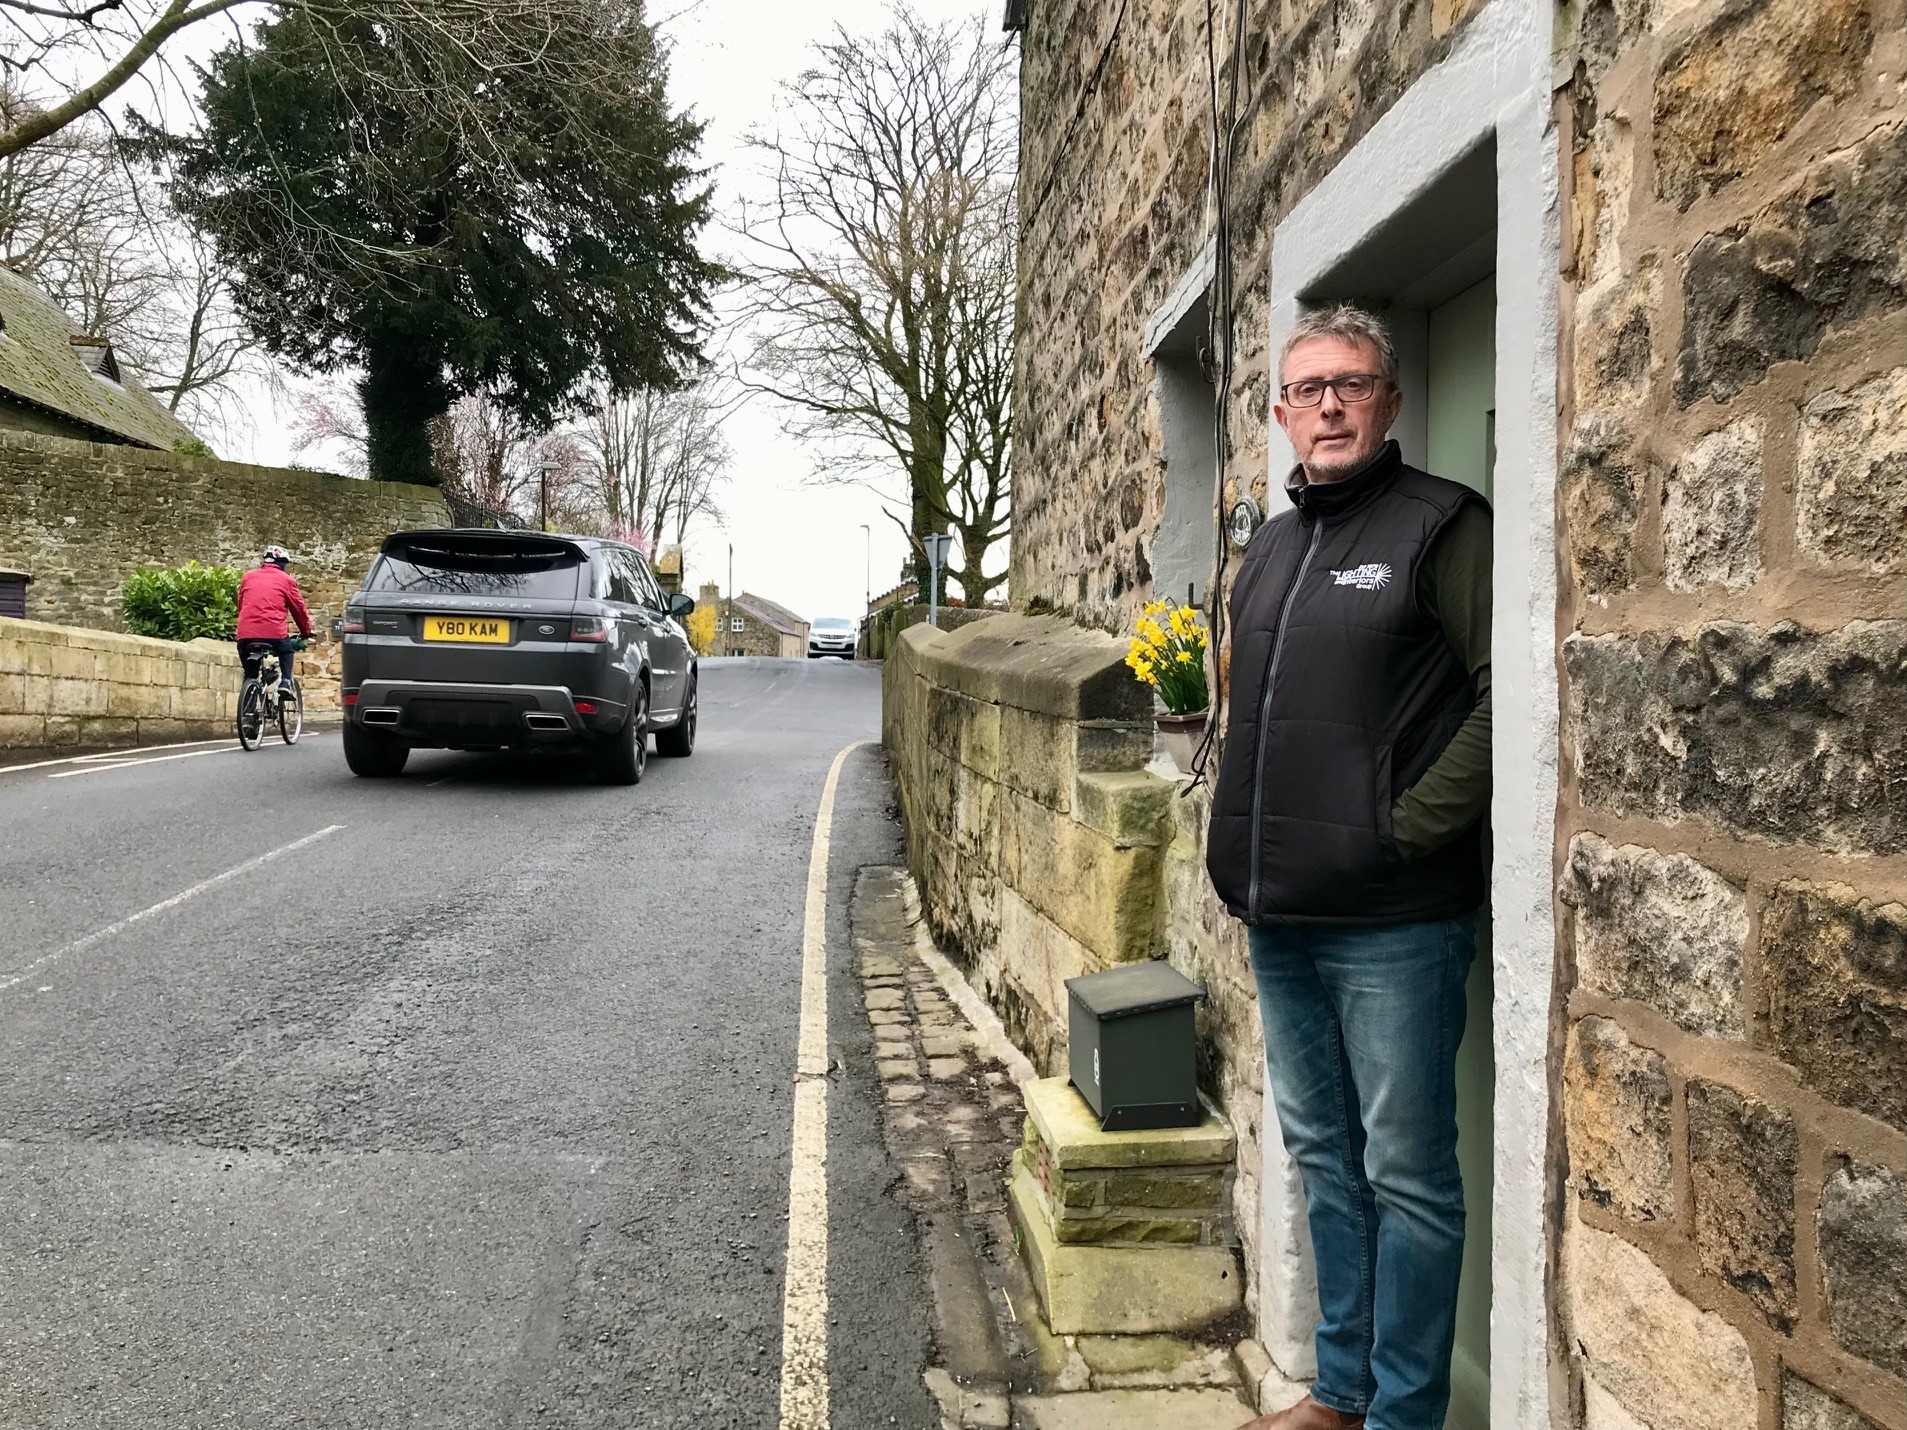 Steve Nightingale at his house in the Square, Waddington near Clitheroe. The old bridge takes traffic to and from West Bradford. Haweswater tunnel planning application by United Utilities.